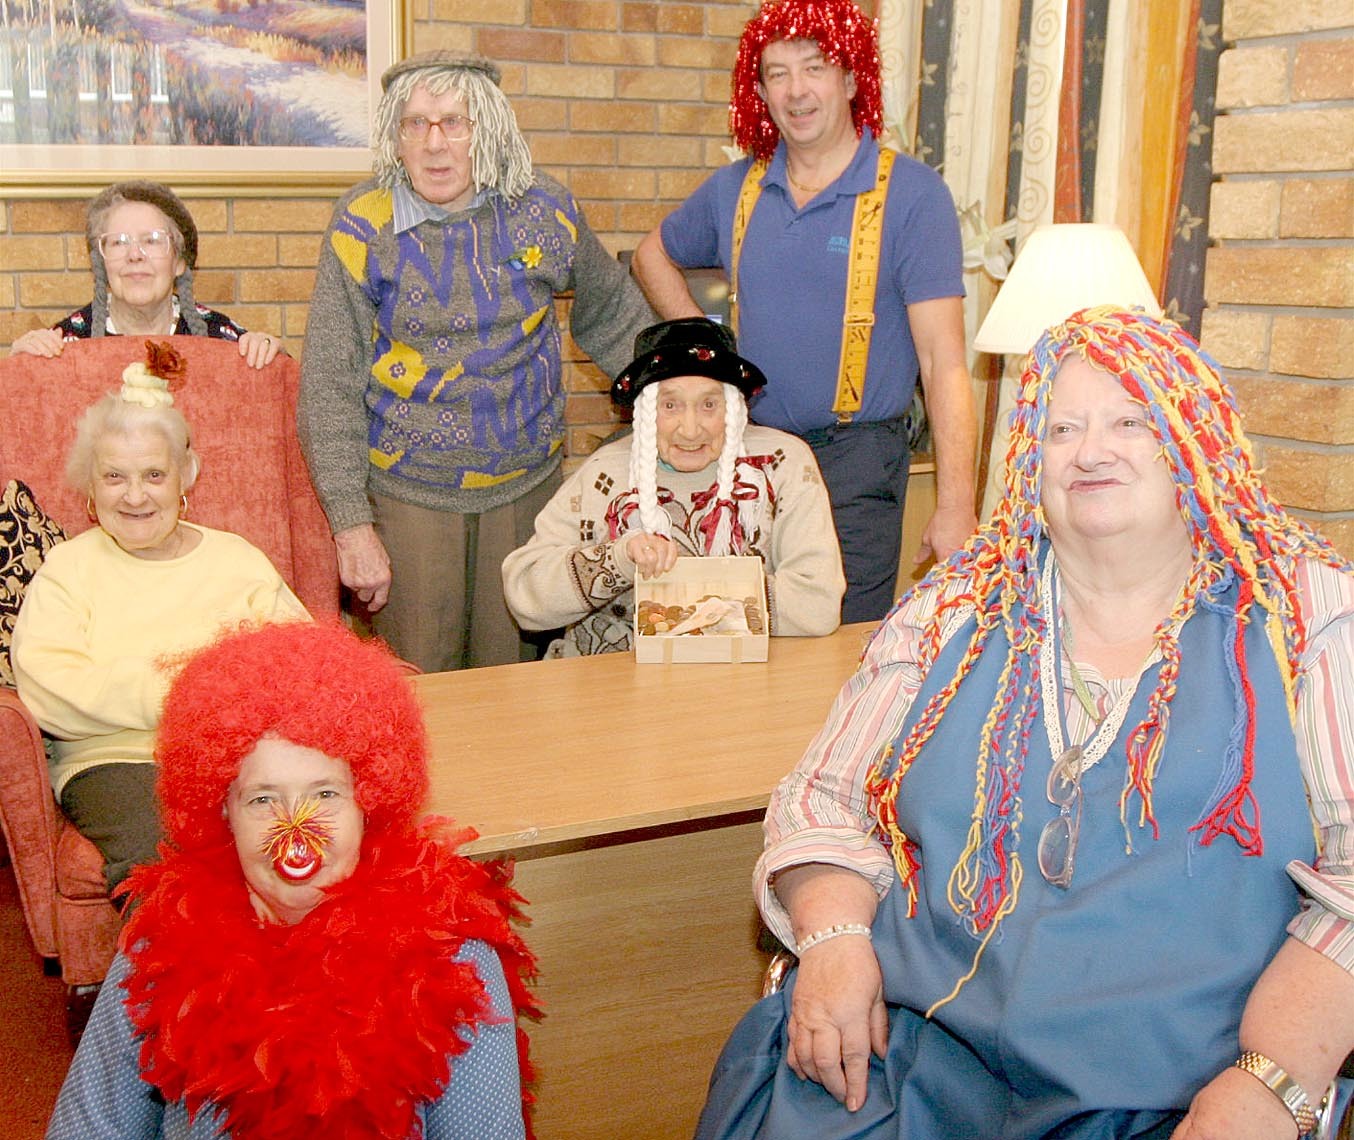 Plas Cae Crwn Residential Home, Newtown Pic (back) Doris Edwards, Ada Adams, Colwyn Howells, Alice Bayliss and Clive Burd. (front) Carol Davies (care assistant), Mary-Jo. The residents hand made wigs and then took to the streets to ask for donations to